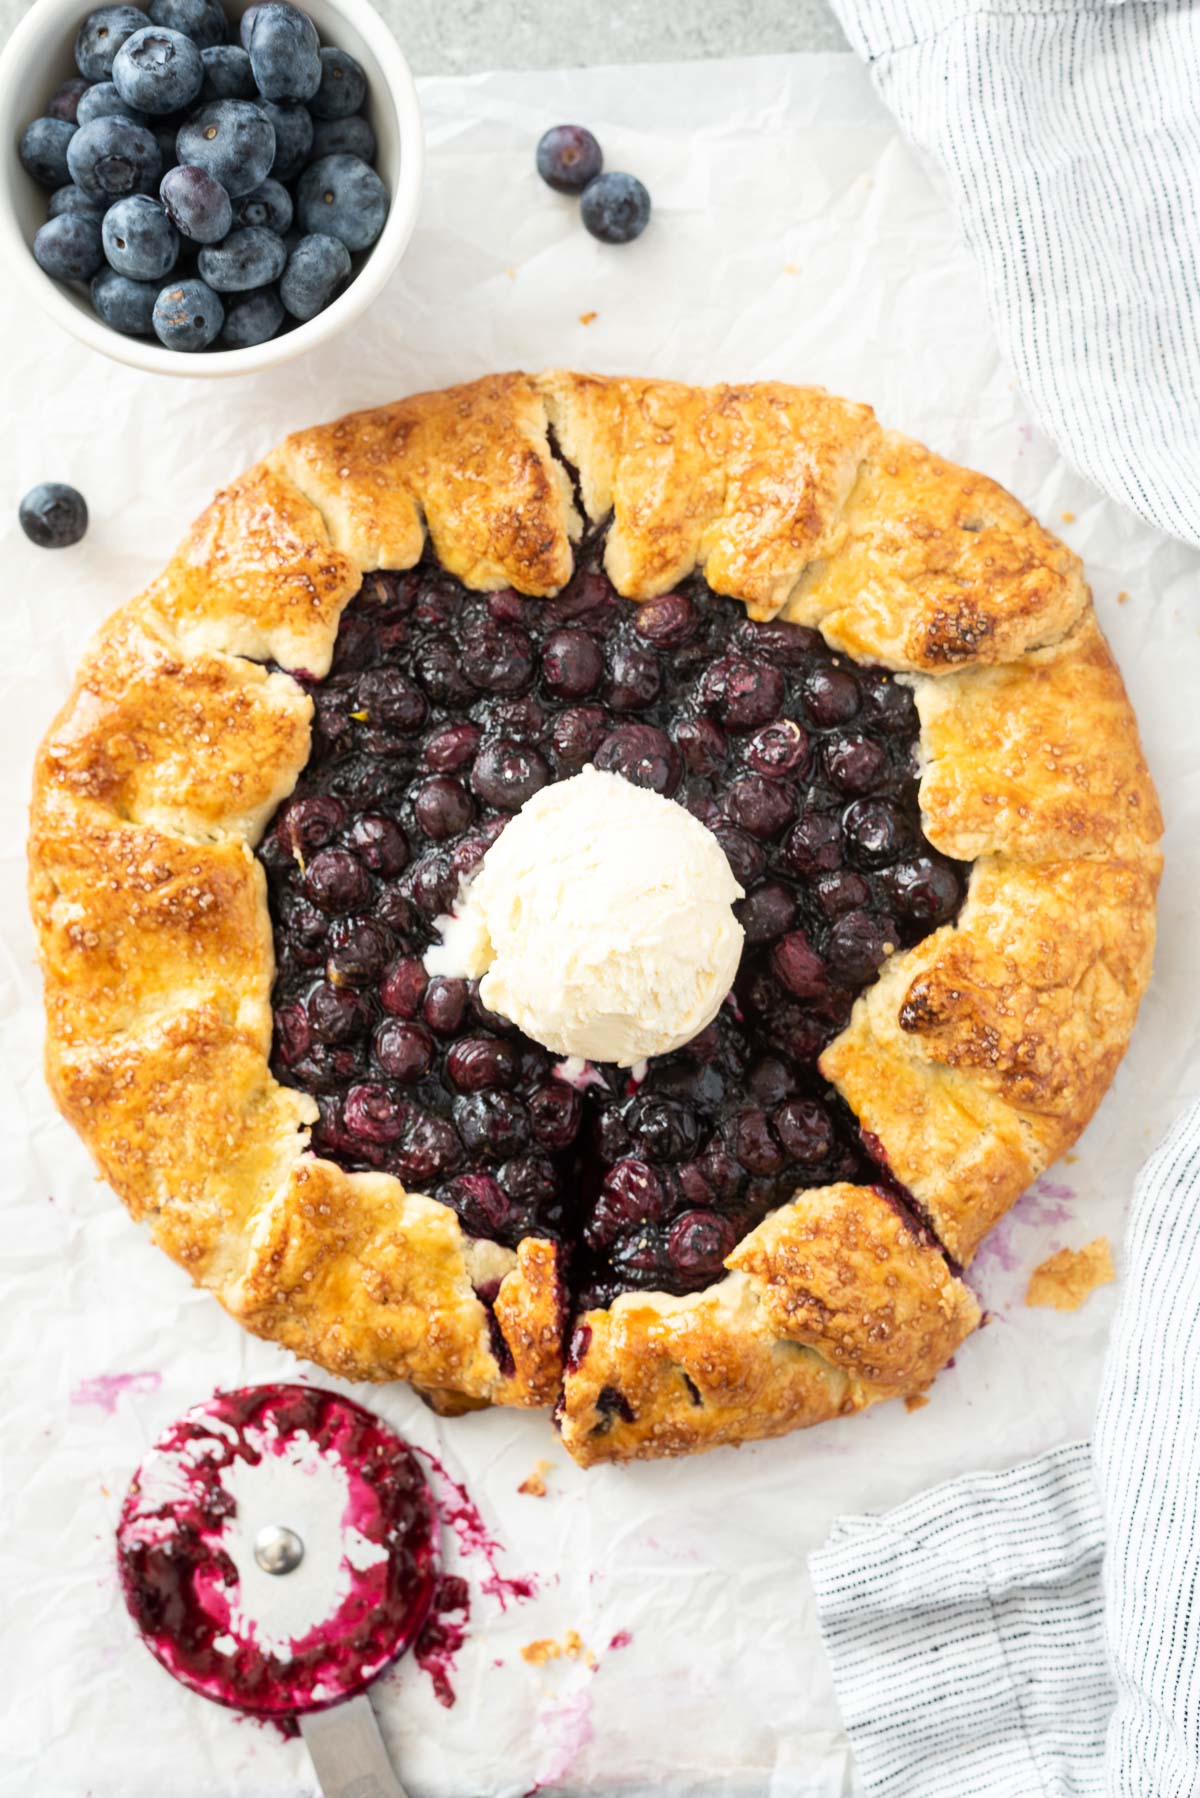 Blueberry galette with scoop of ice cream in center